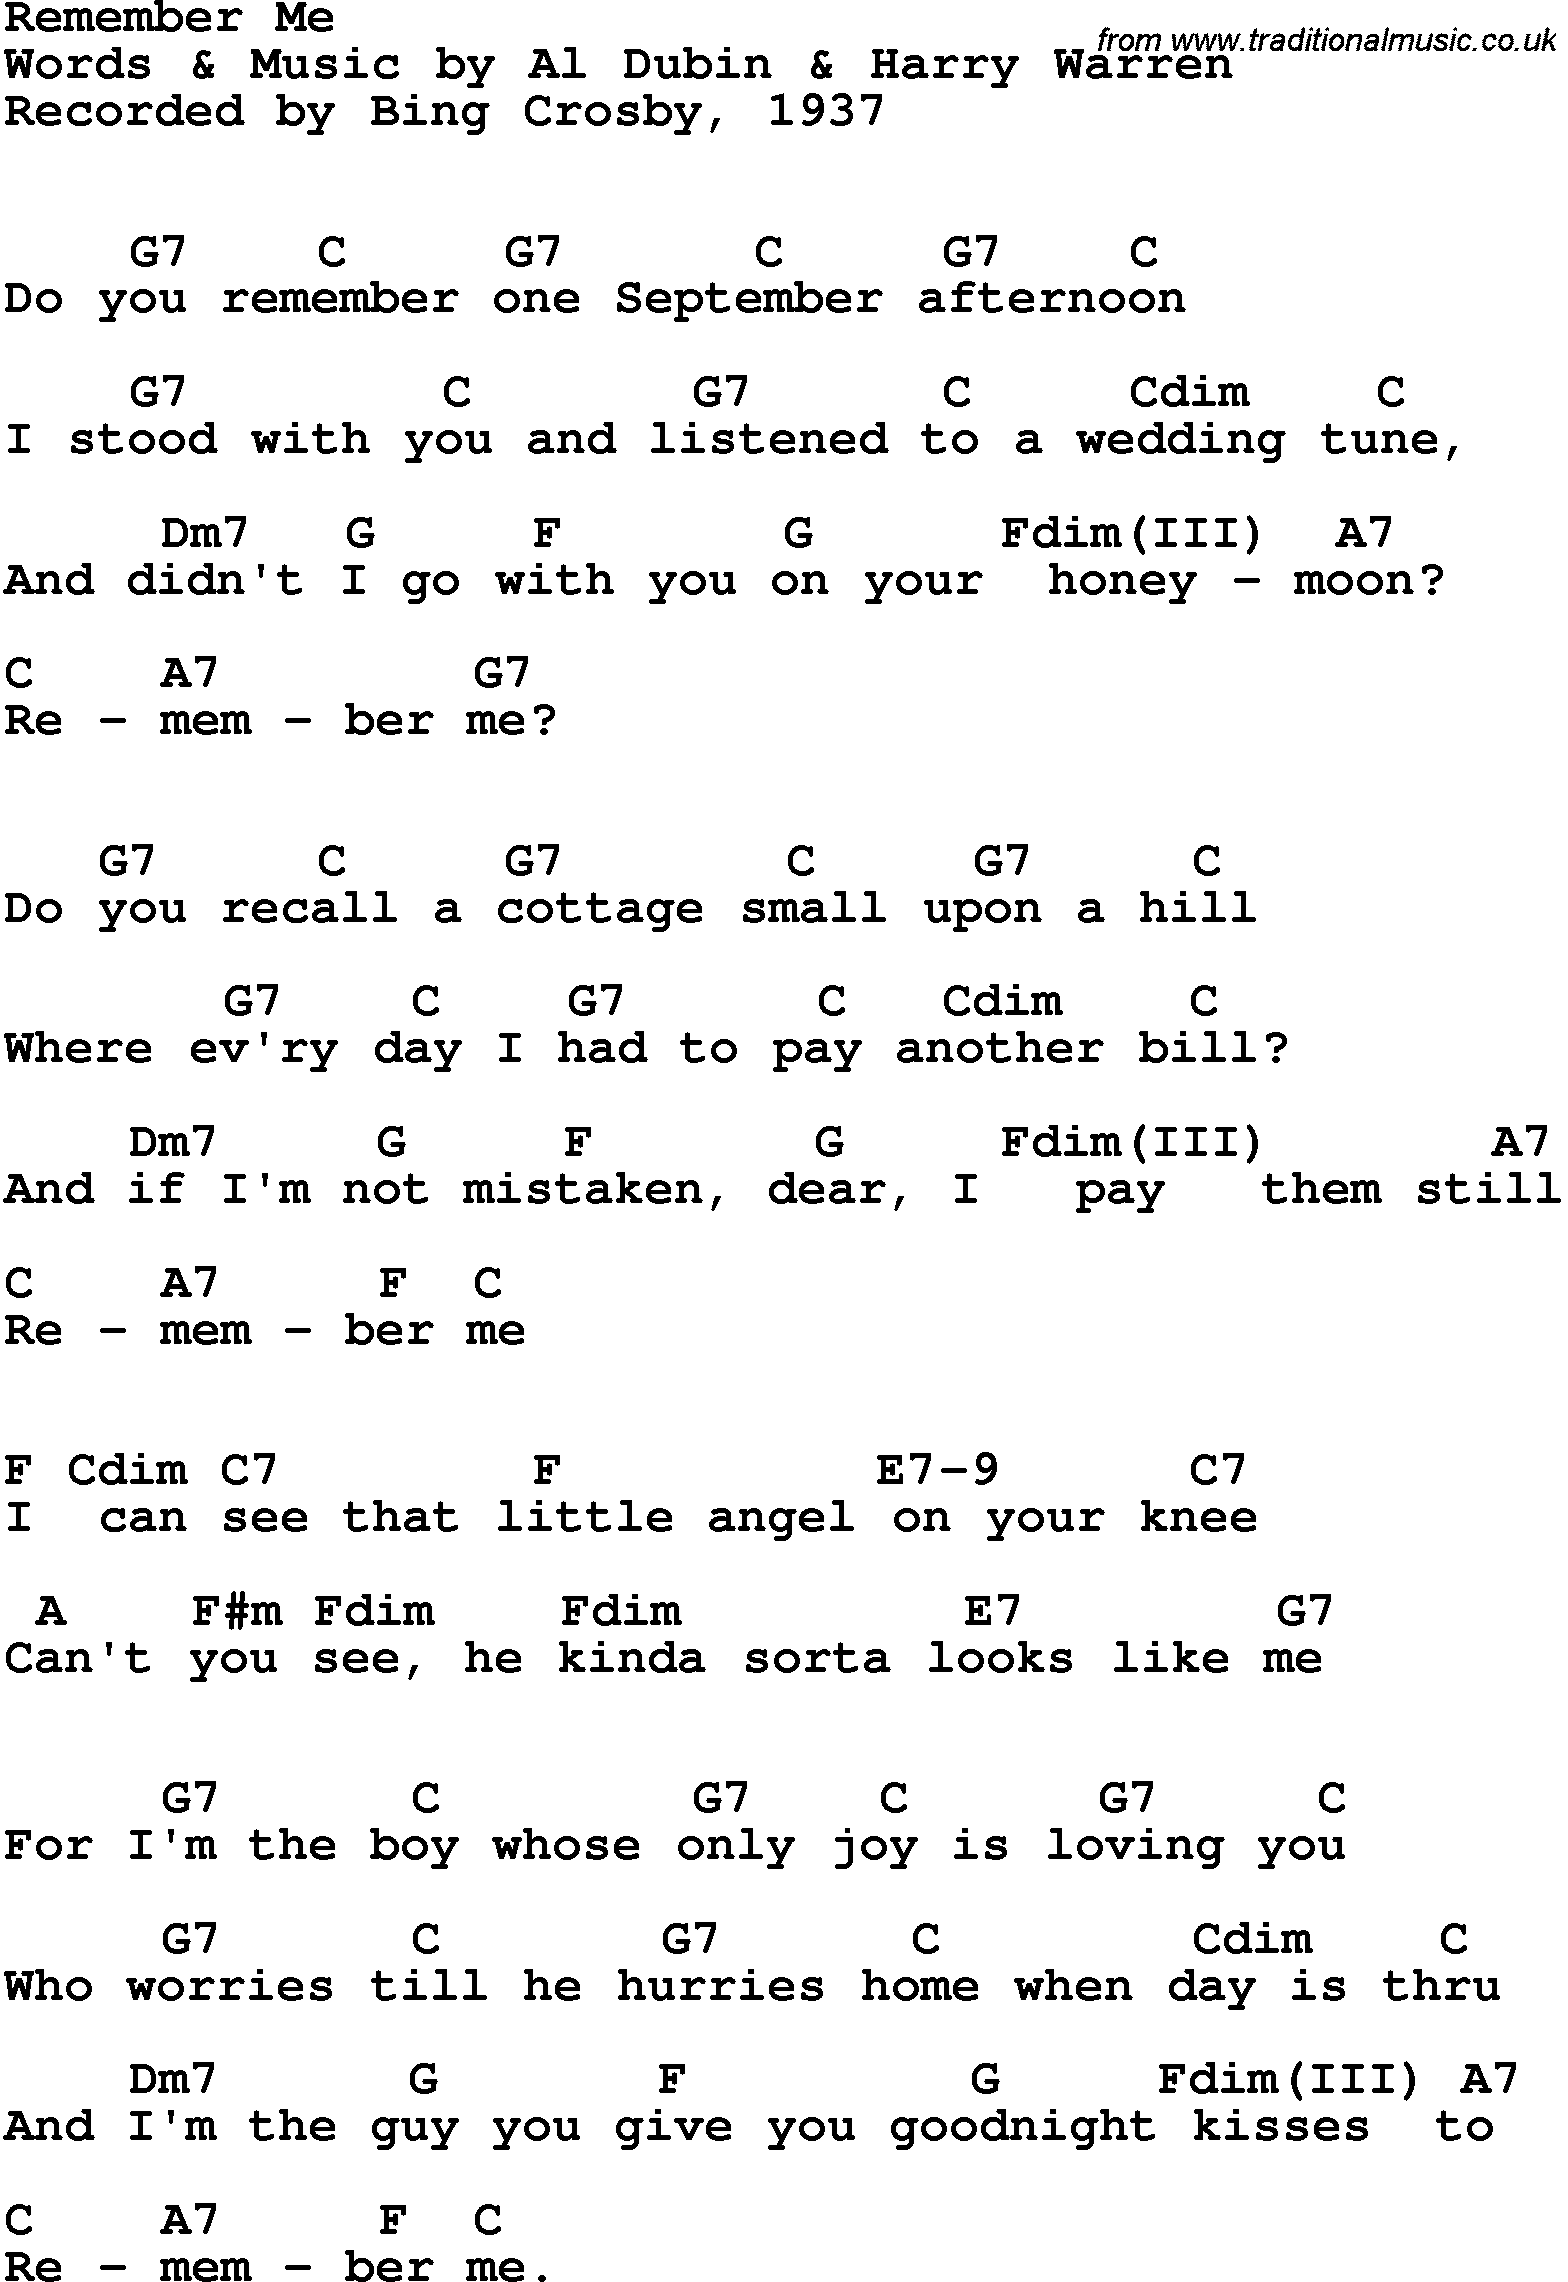 Song Lyrics With Guitar Chords For Remember Me Bing Crosby 1937